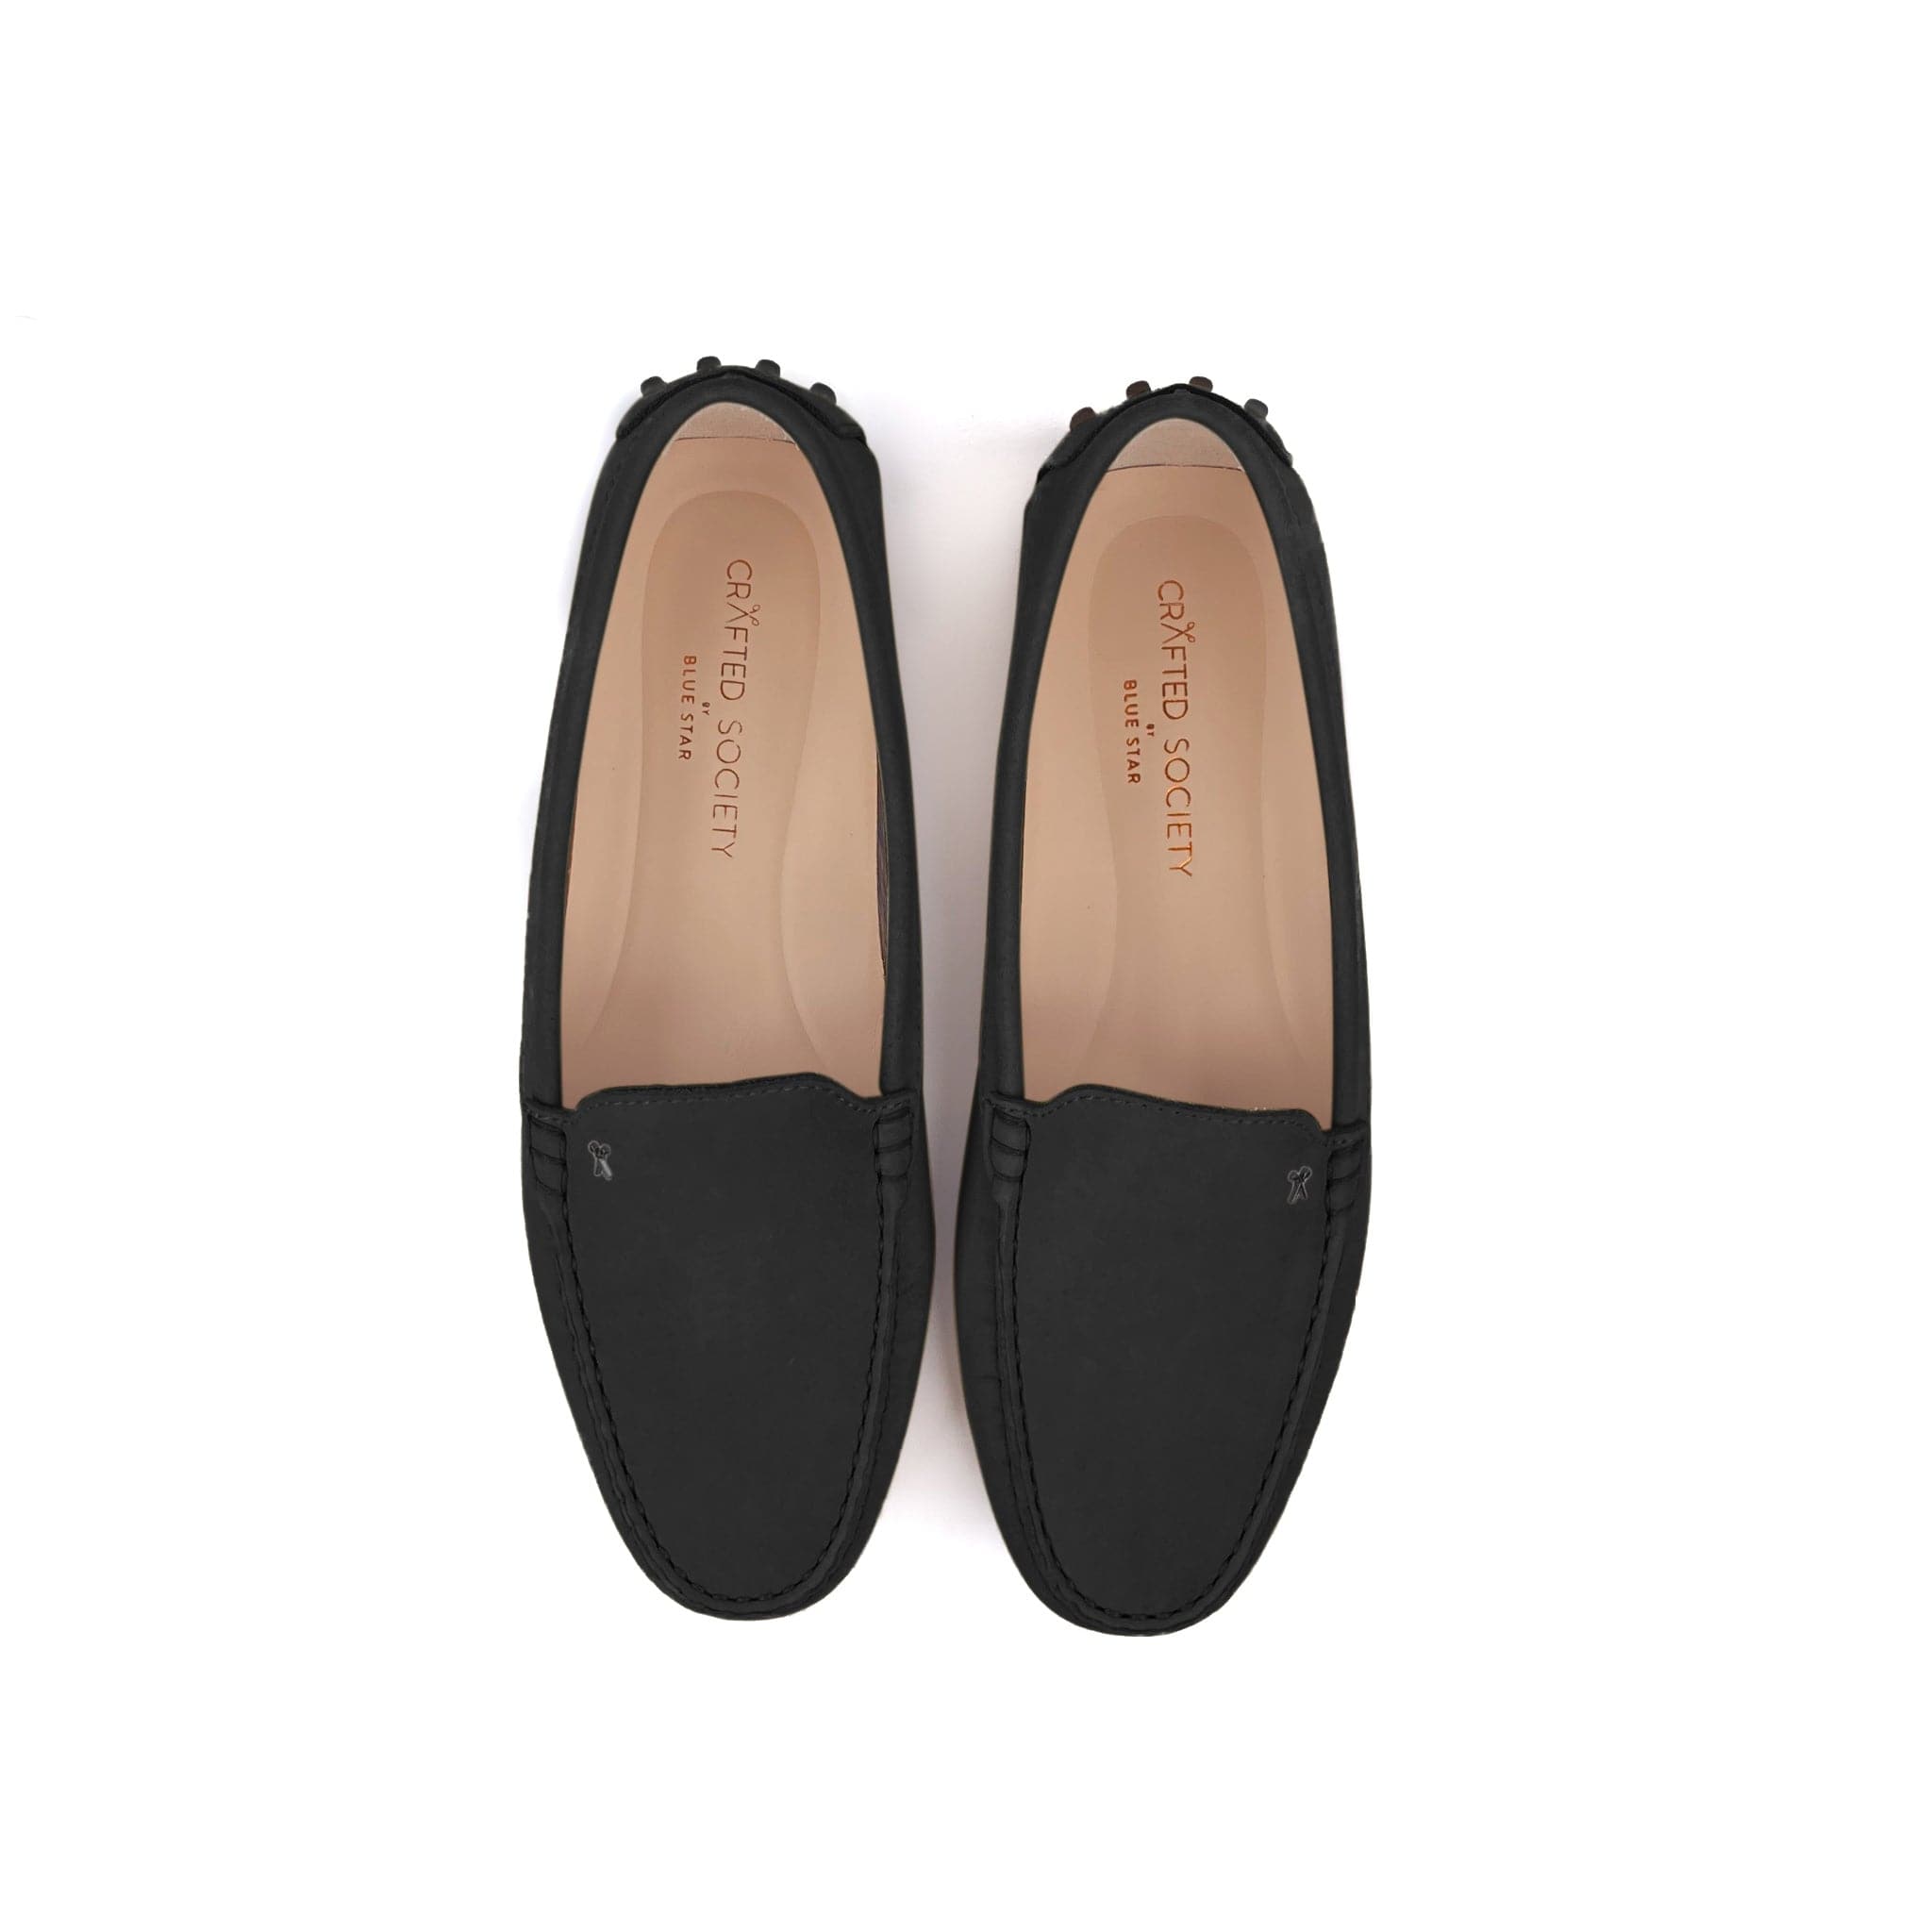 Driving shoe or moccasin in black italian nubuck leather with tan coloured calfskin lining. It has the iconic scissor on the right side of the vamp showing from a top view on a white background